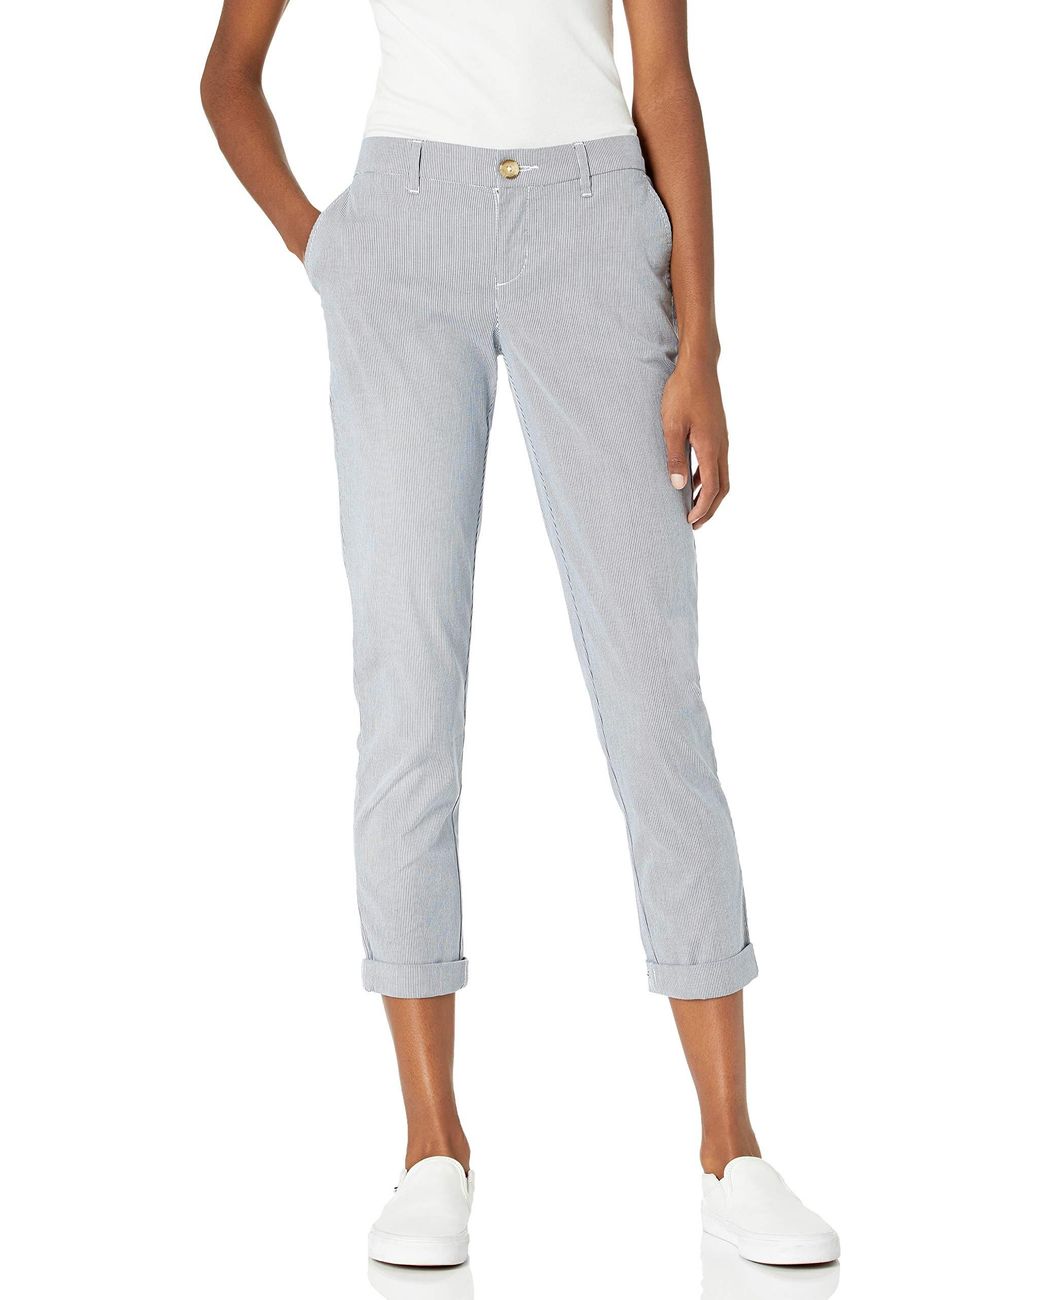 Tommy Hilfiger Relaxed Fit Hampton Chino Pant in Blue/White (Blue) - Lyst